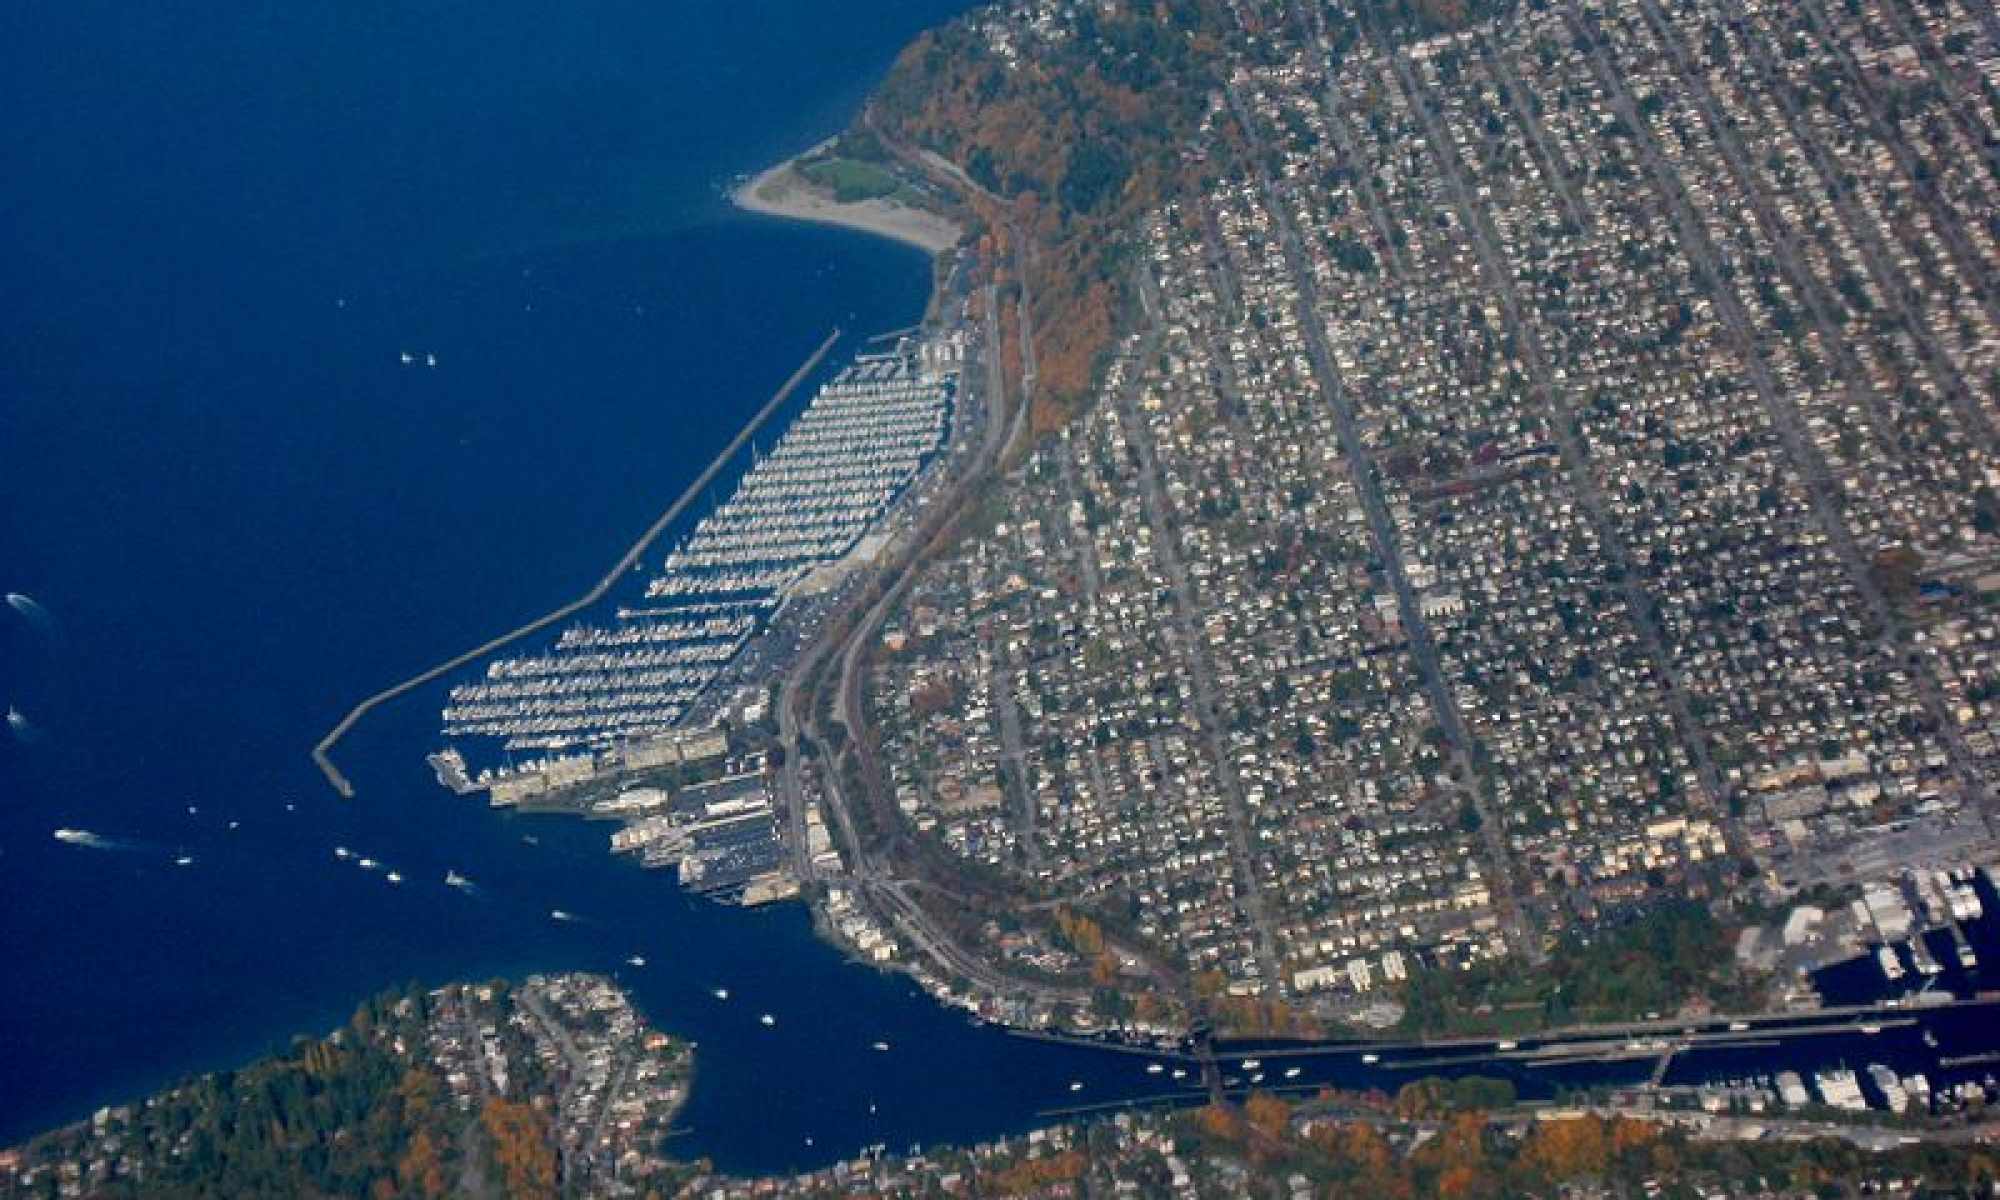 Aerial view of the Ballard area of Seattle